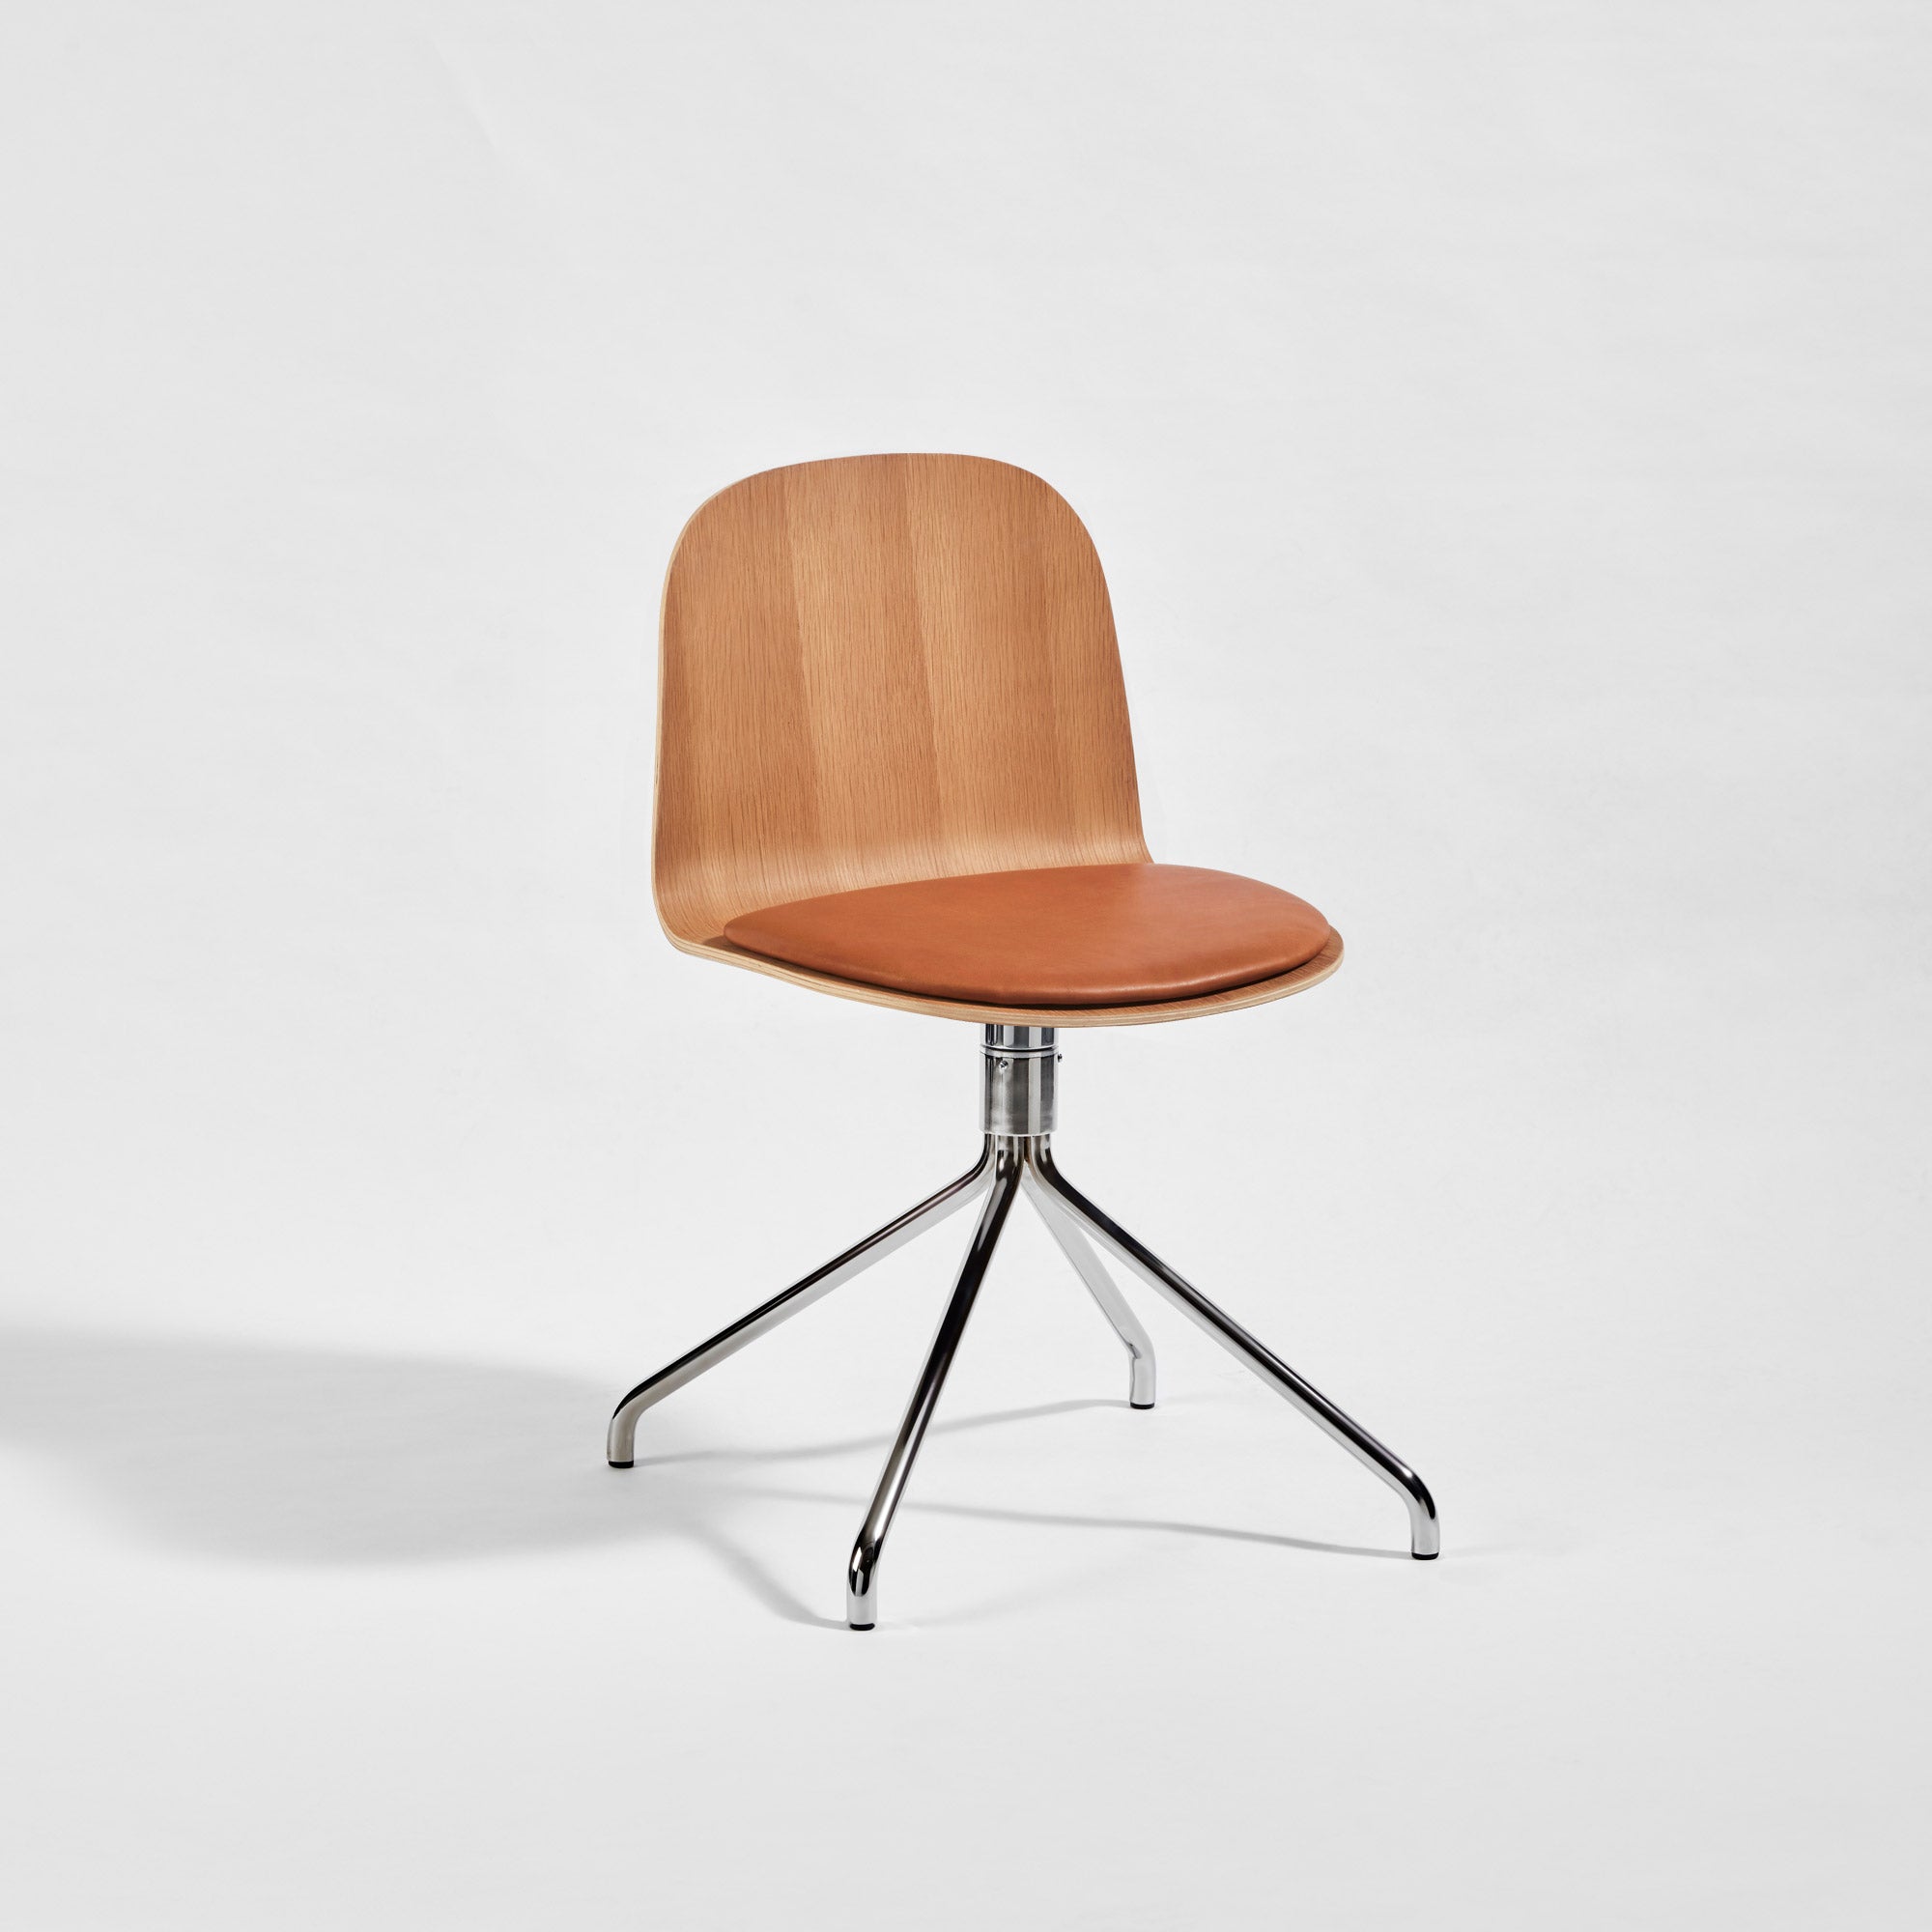 Potato Chair | Swivel Timber Dining Office Chair with Handle | GibsonKarlo | DesignByThem